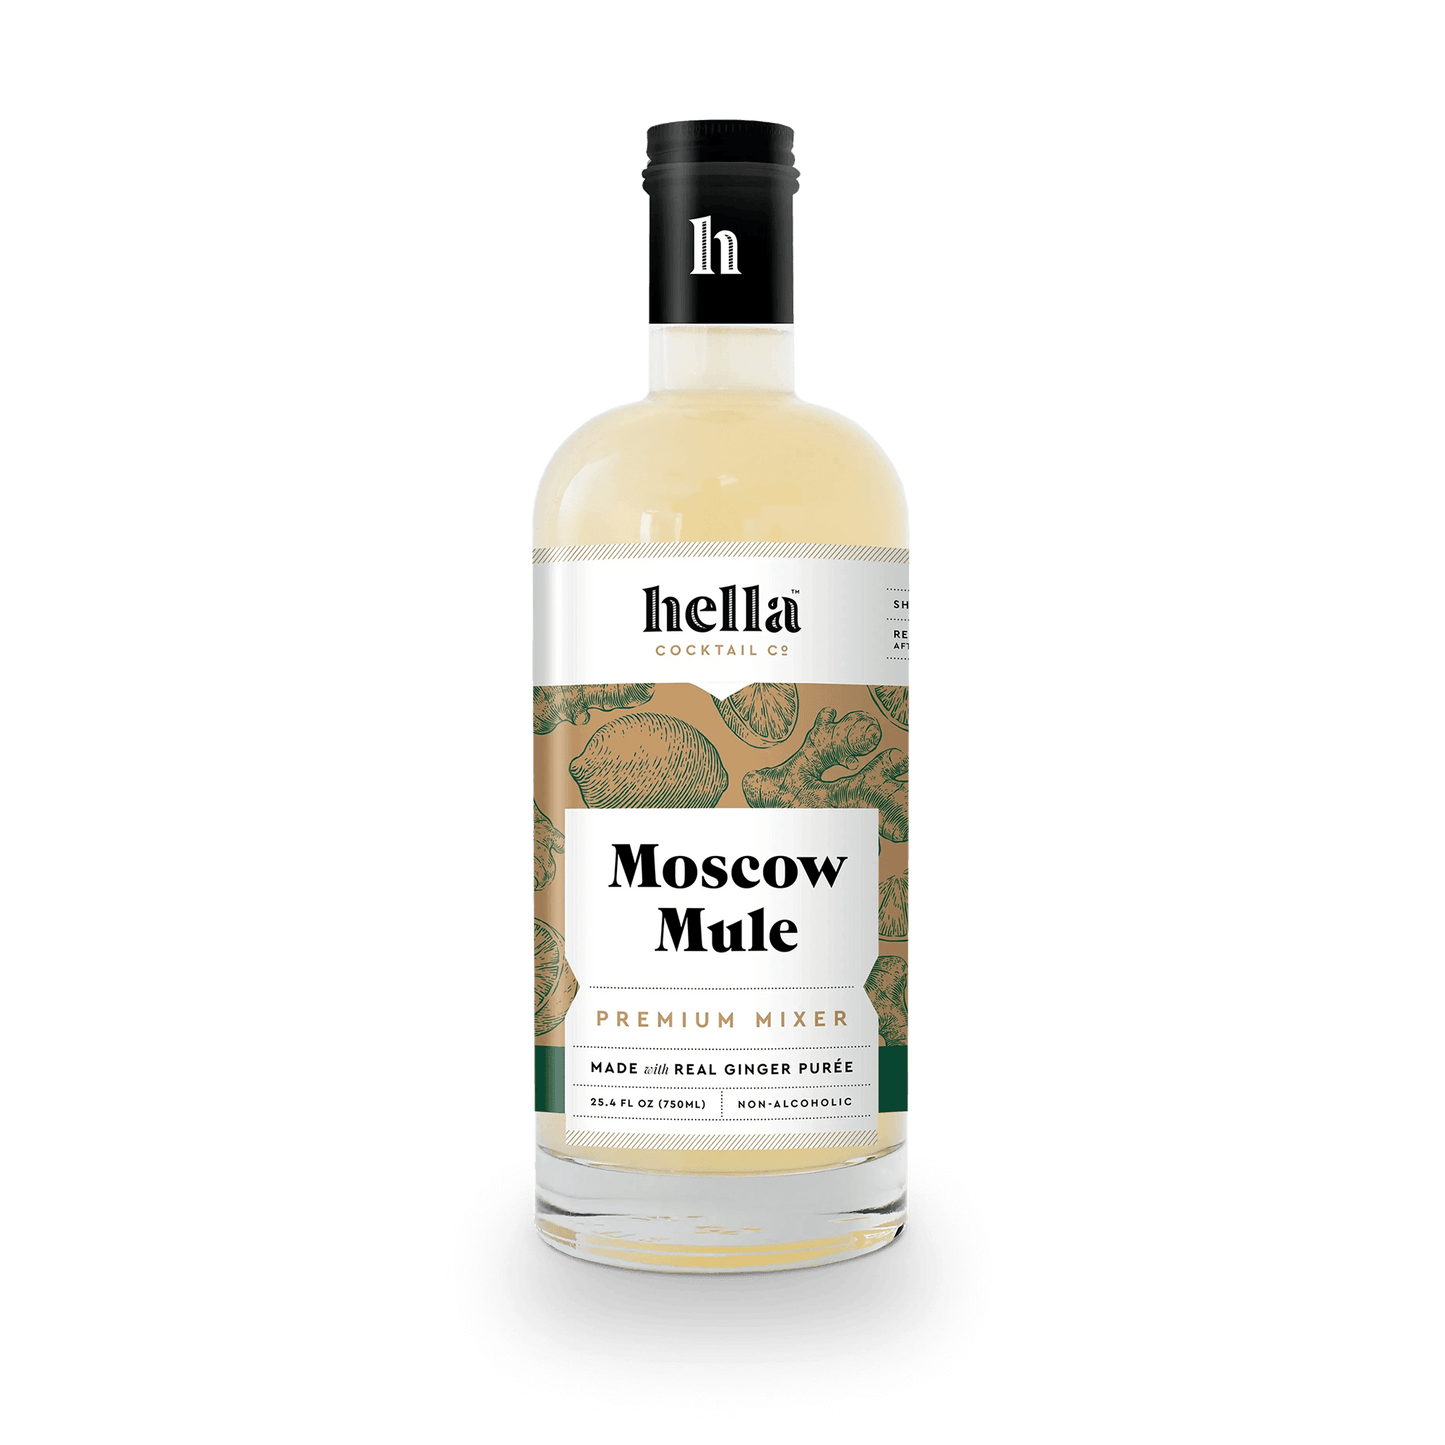 Hella Cocktail Moscow Mule Mixer Bottle